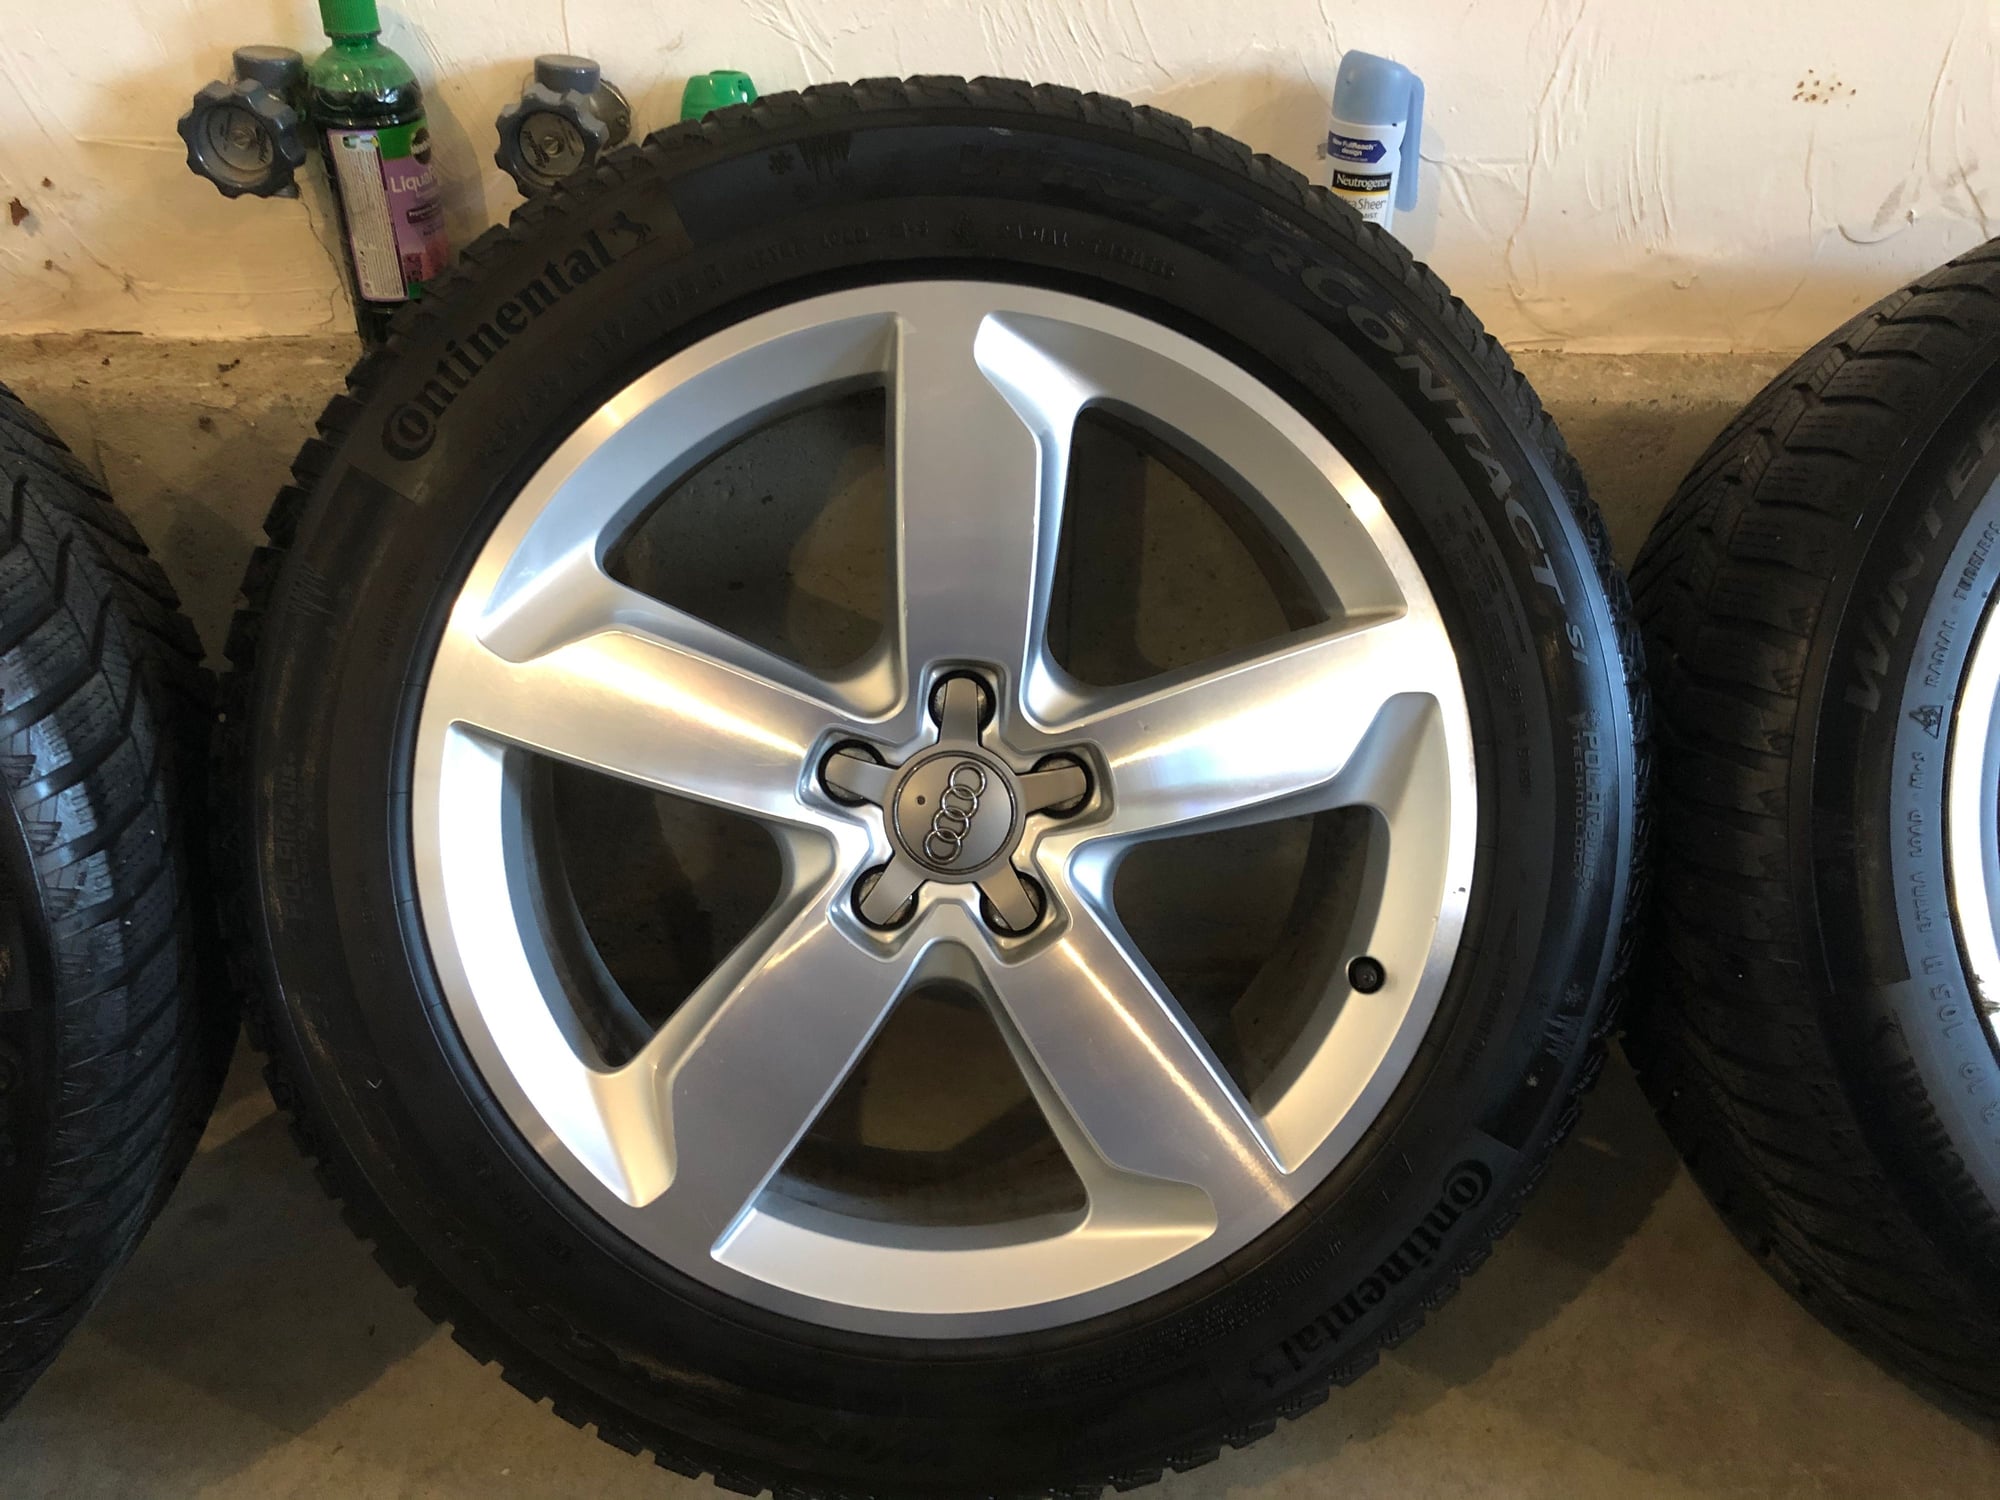 Wheels and Tires/Axles - Audi Q5: Winter Tire & Wheel Package - Used - 2008 to 2015 Audi Q5 - Leominster, MA 01453, United States